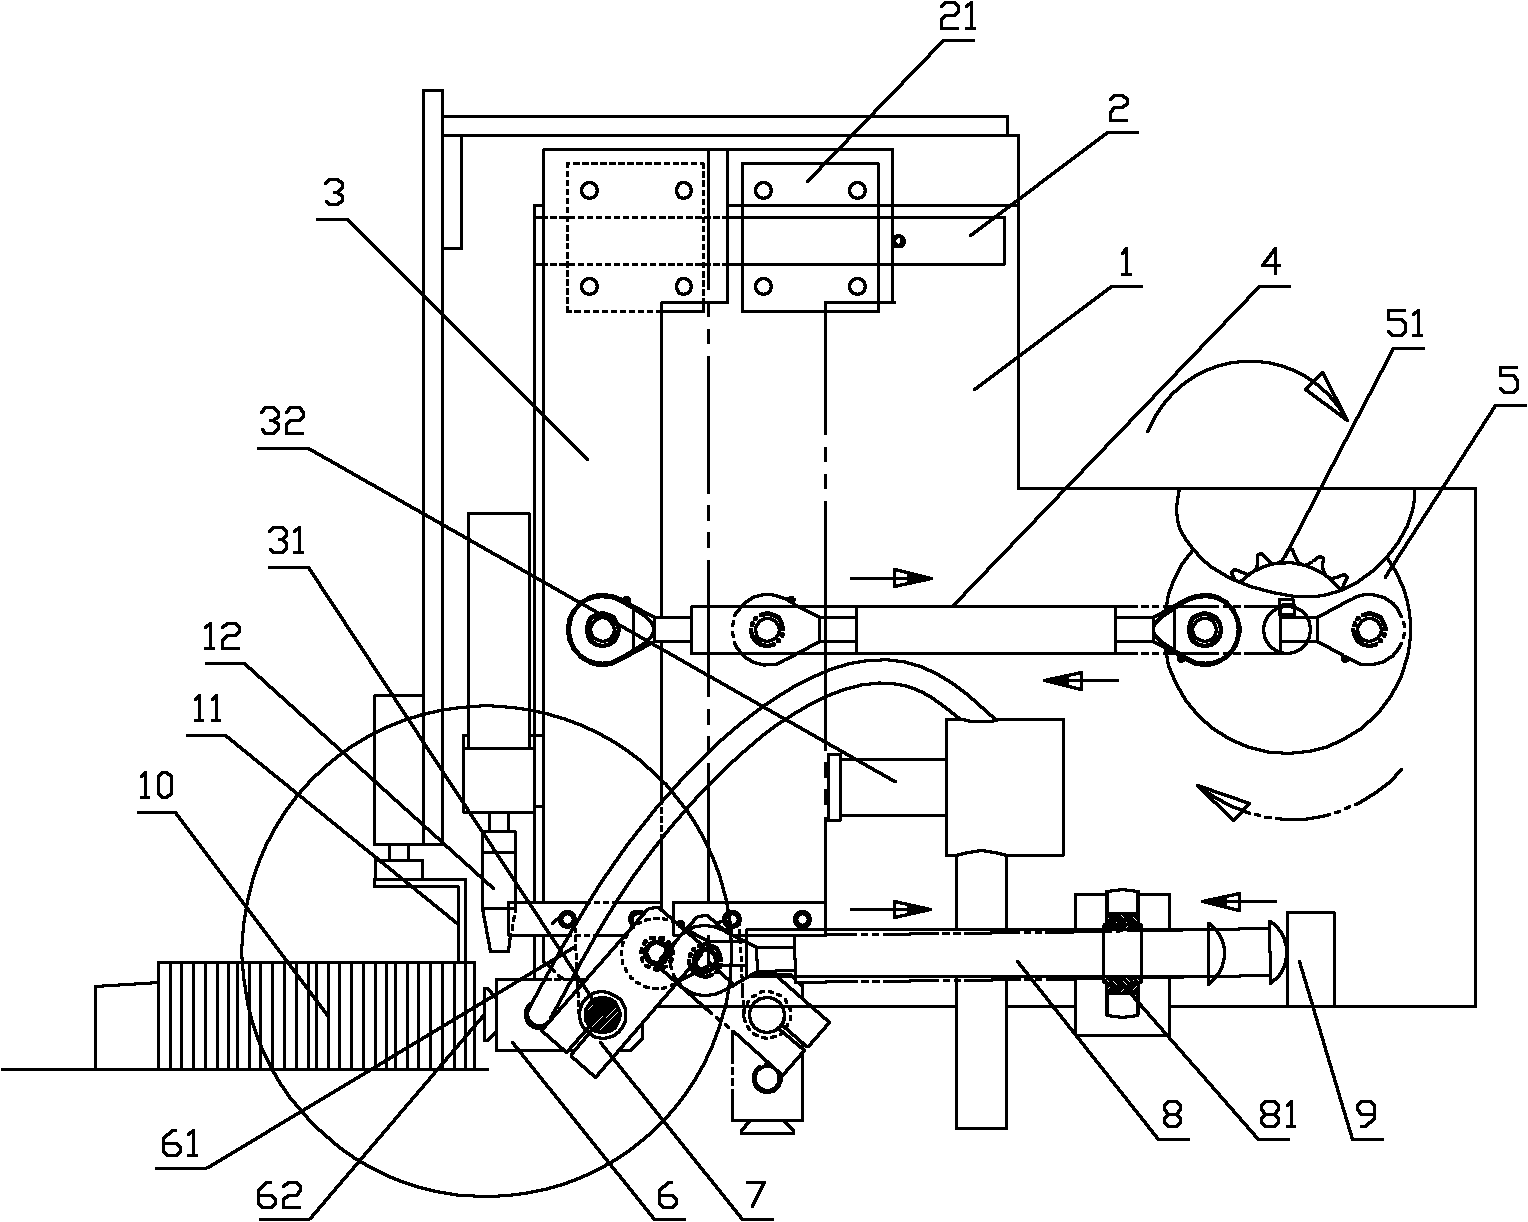 Flake absorbing mechanism for automatic flaker